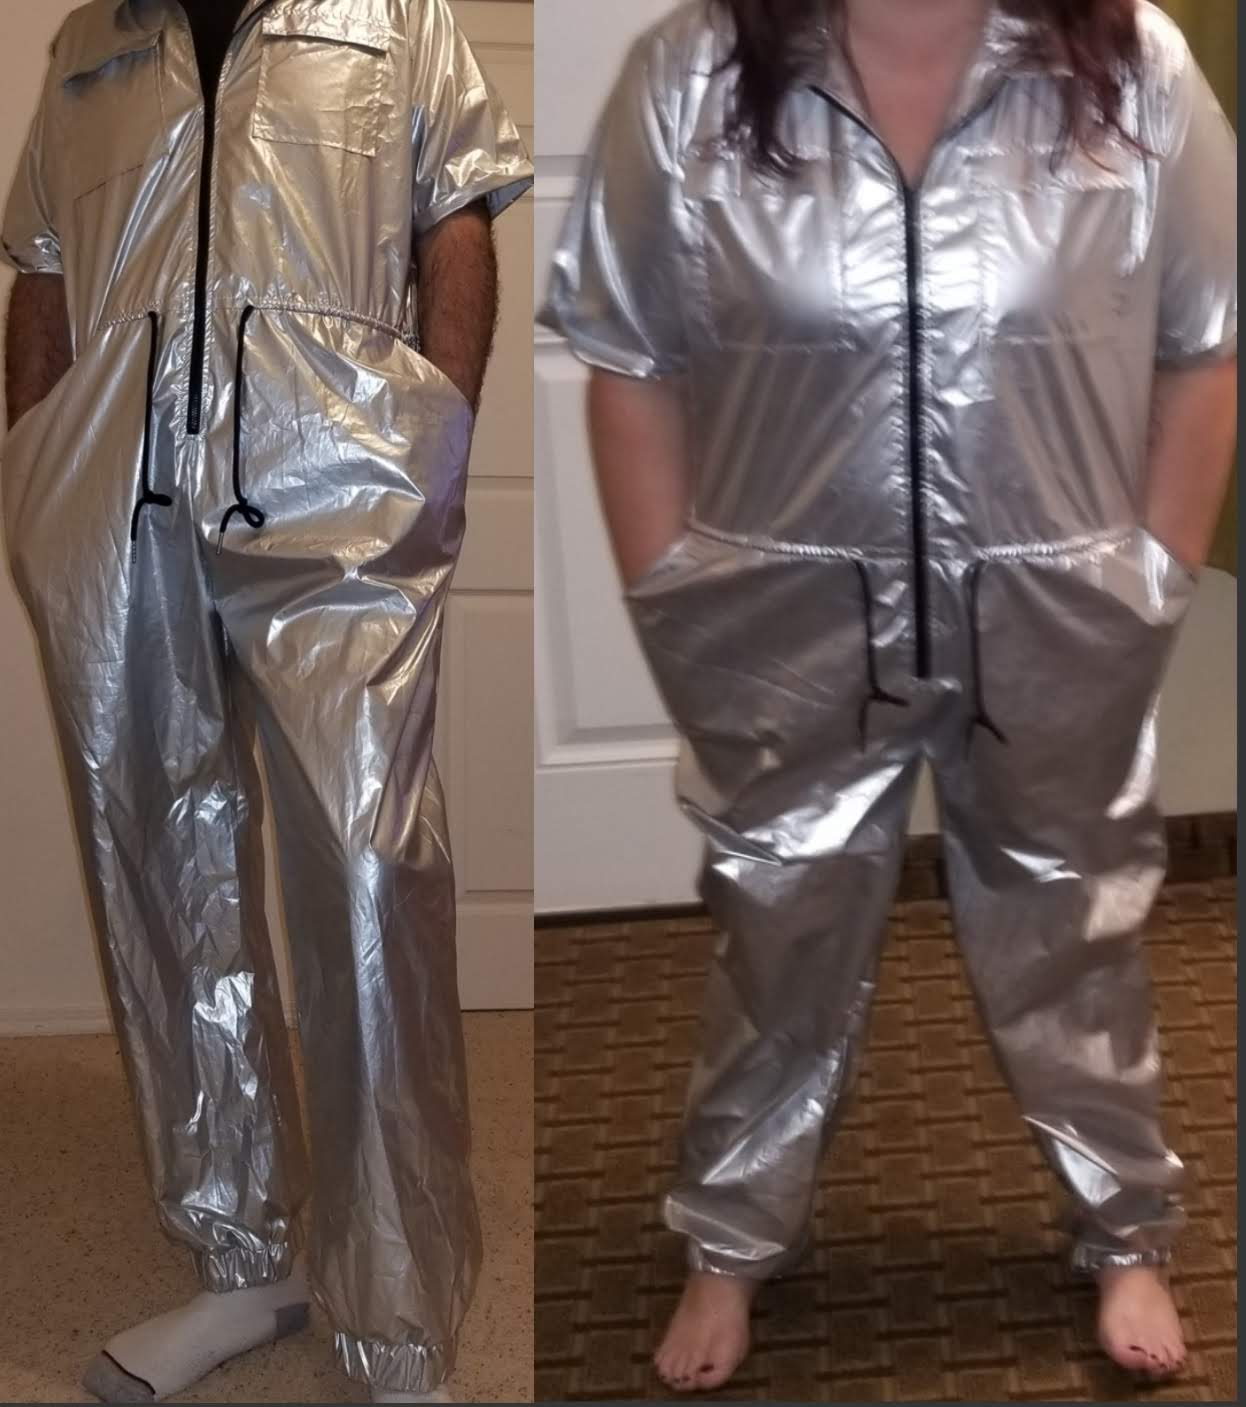 We now have matching jumpsuits